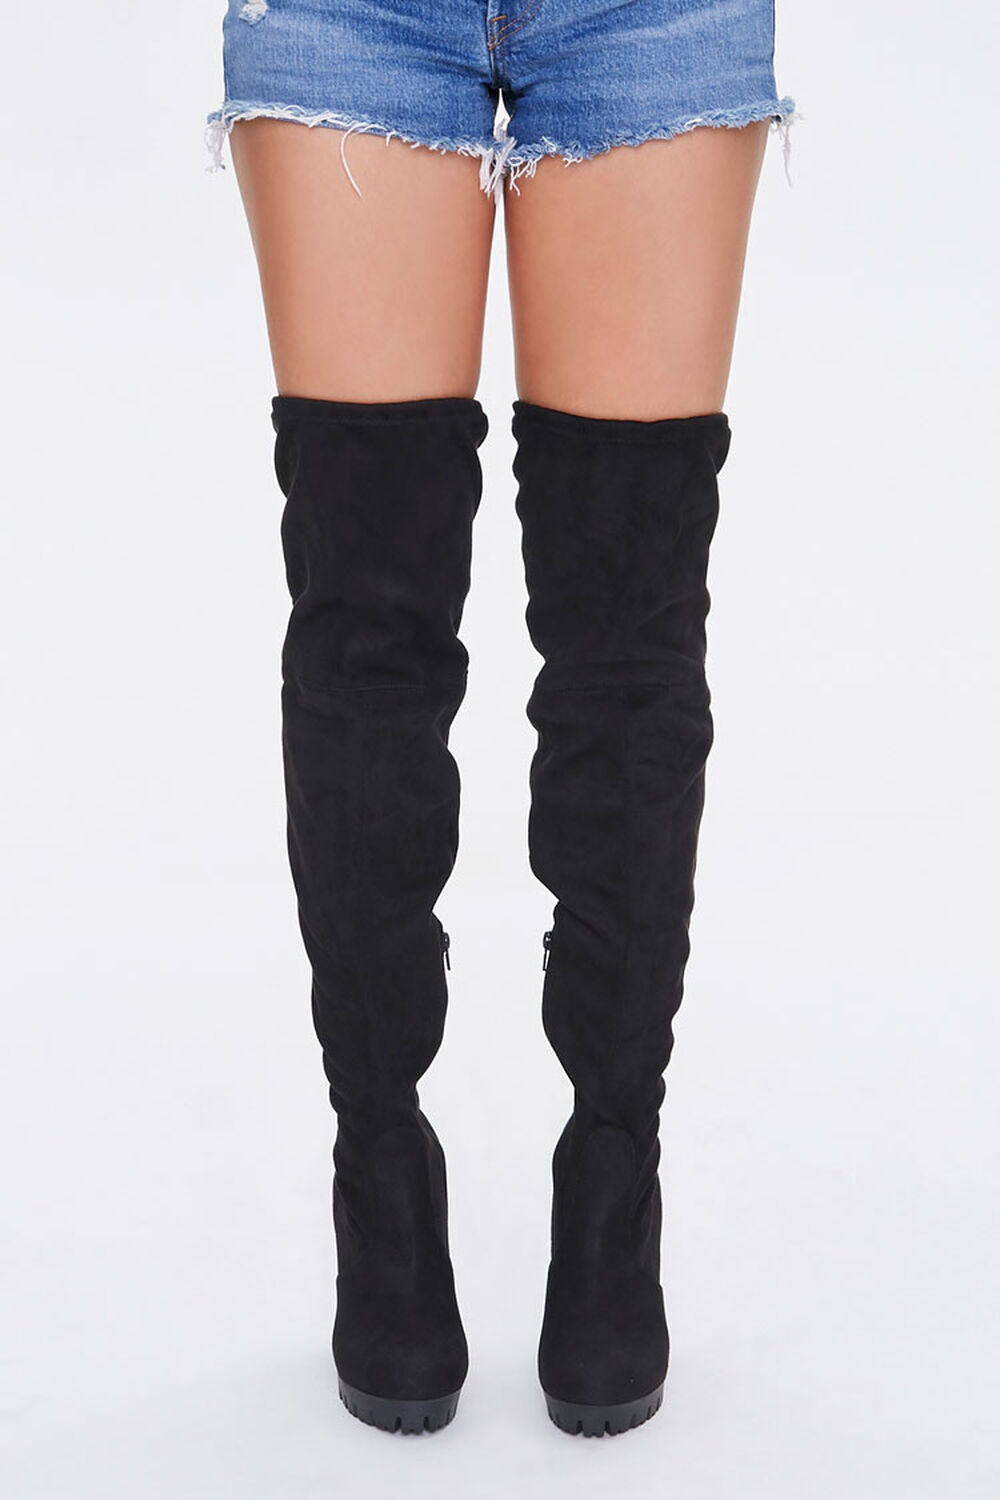 Forever 21 Women's Over-the-Knee Stiletto Platform Boots In Black,  Connecticut Post Mall